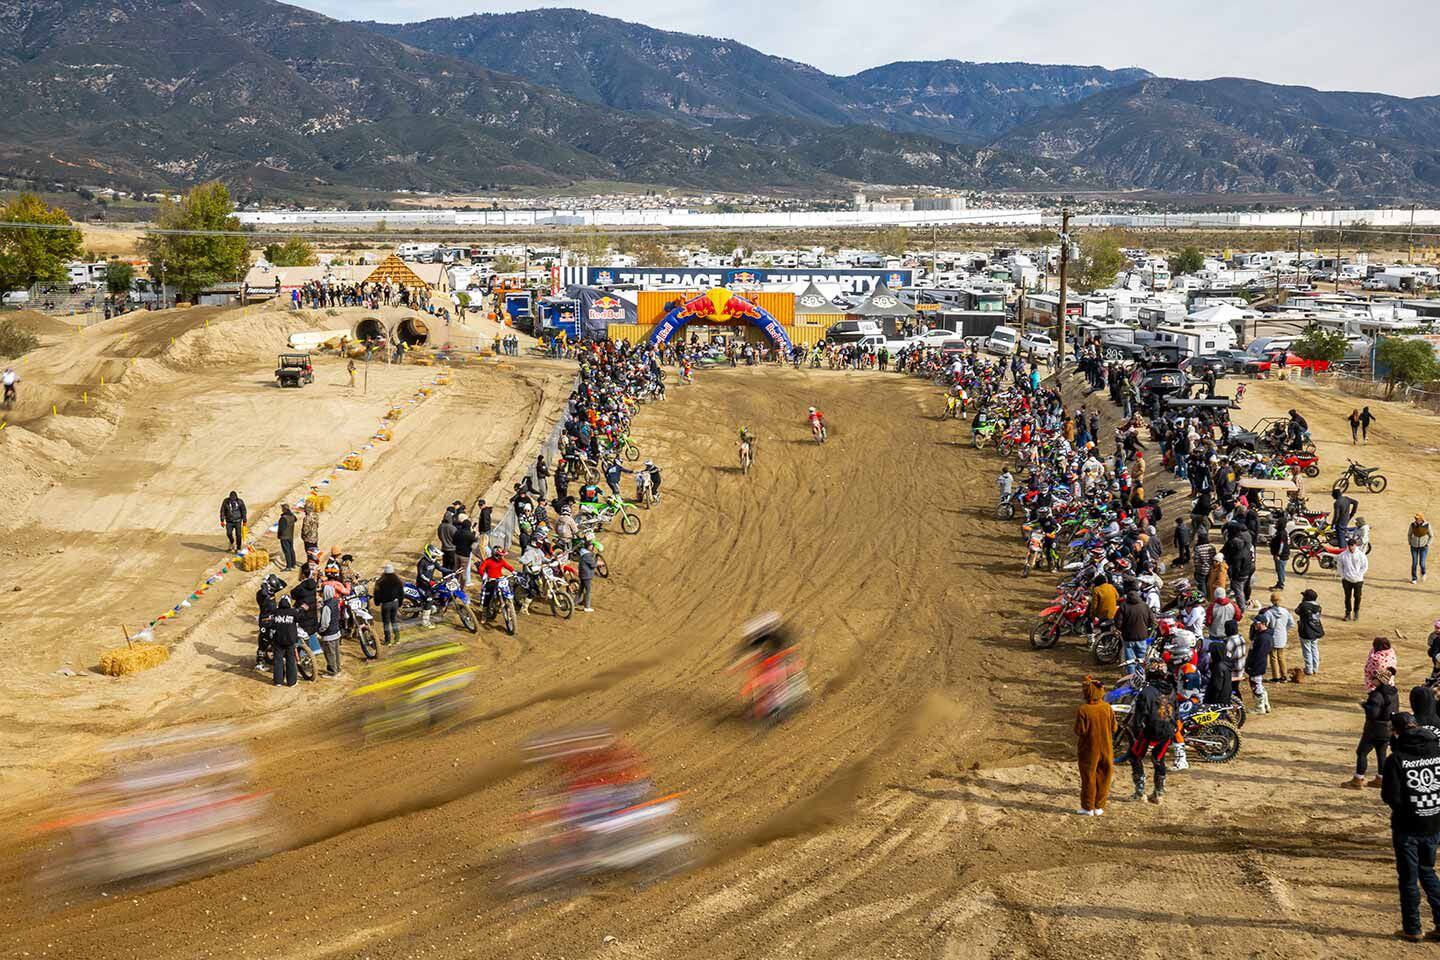 As usual the two-person Moto-A-GoGo team race is always a hit. Two-person teams trade off with one another lap after lap for bragging rights in the 75-minute race.